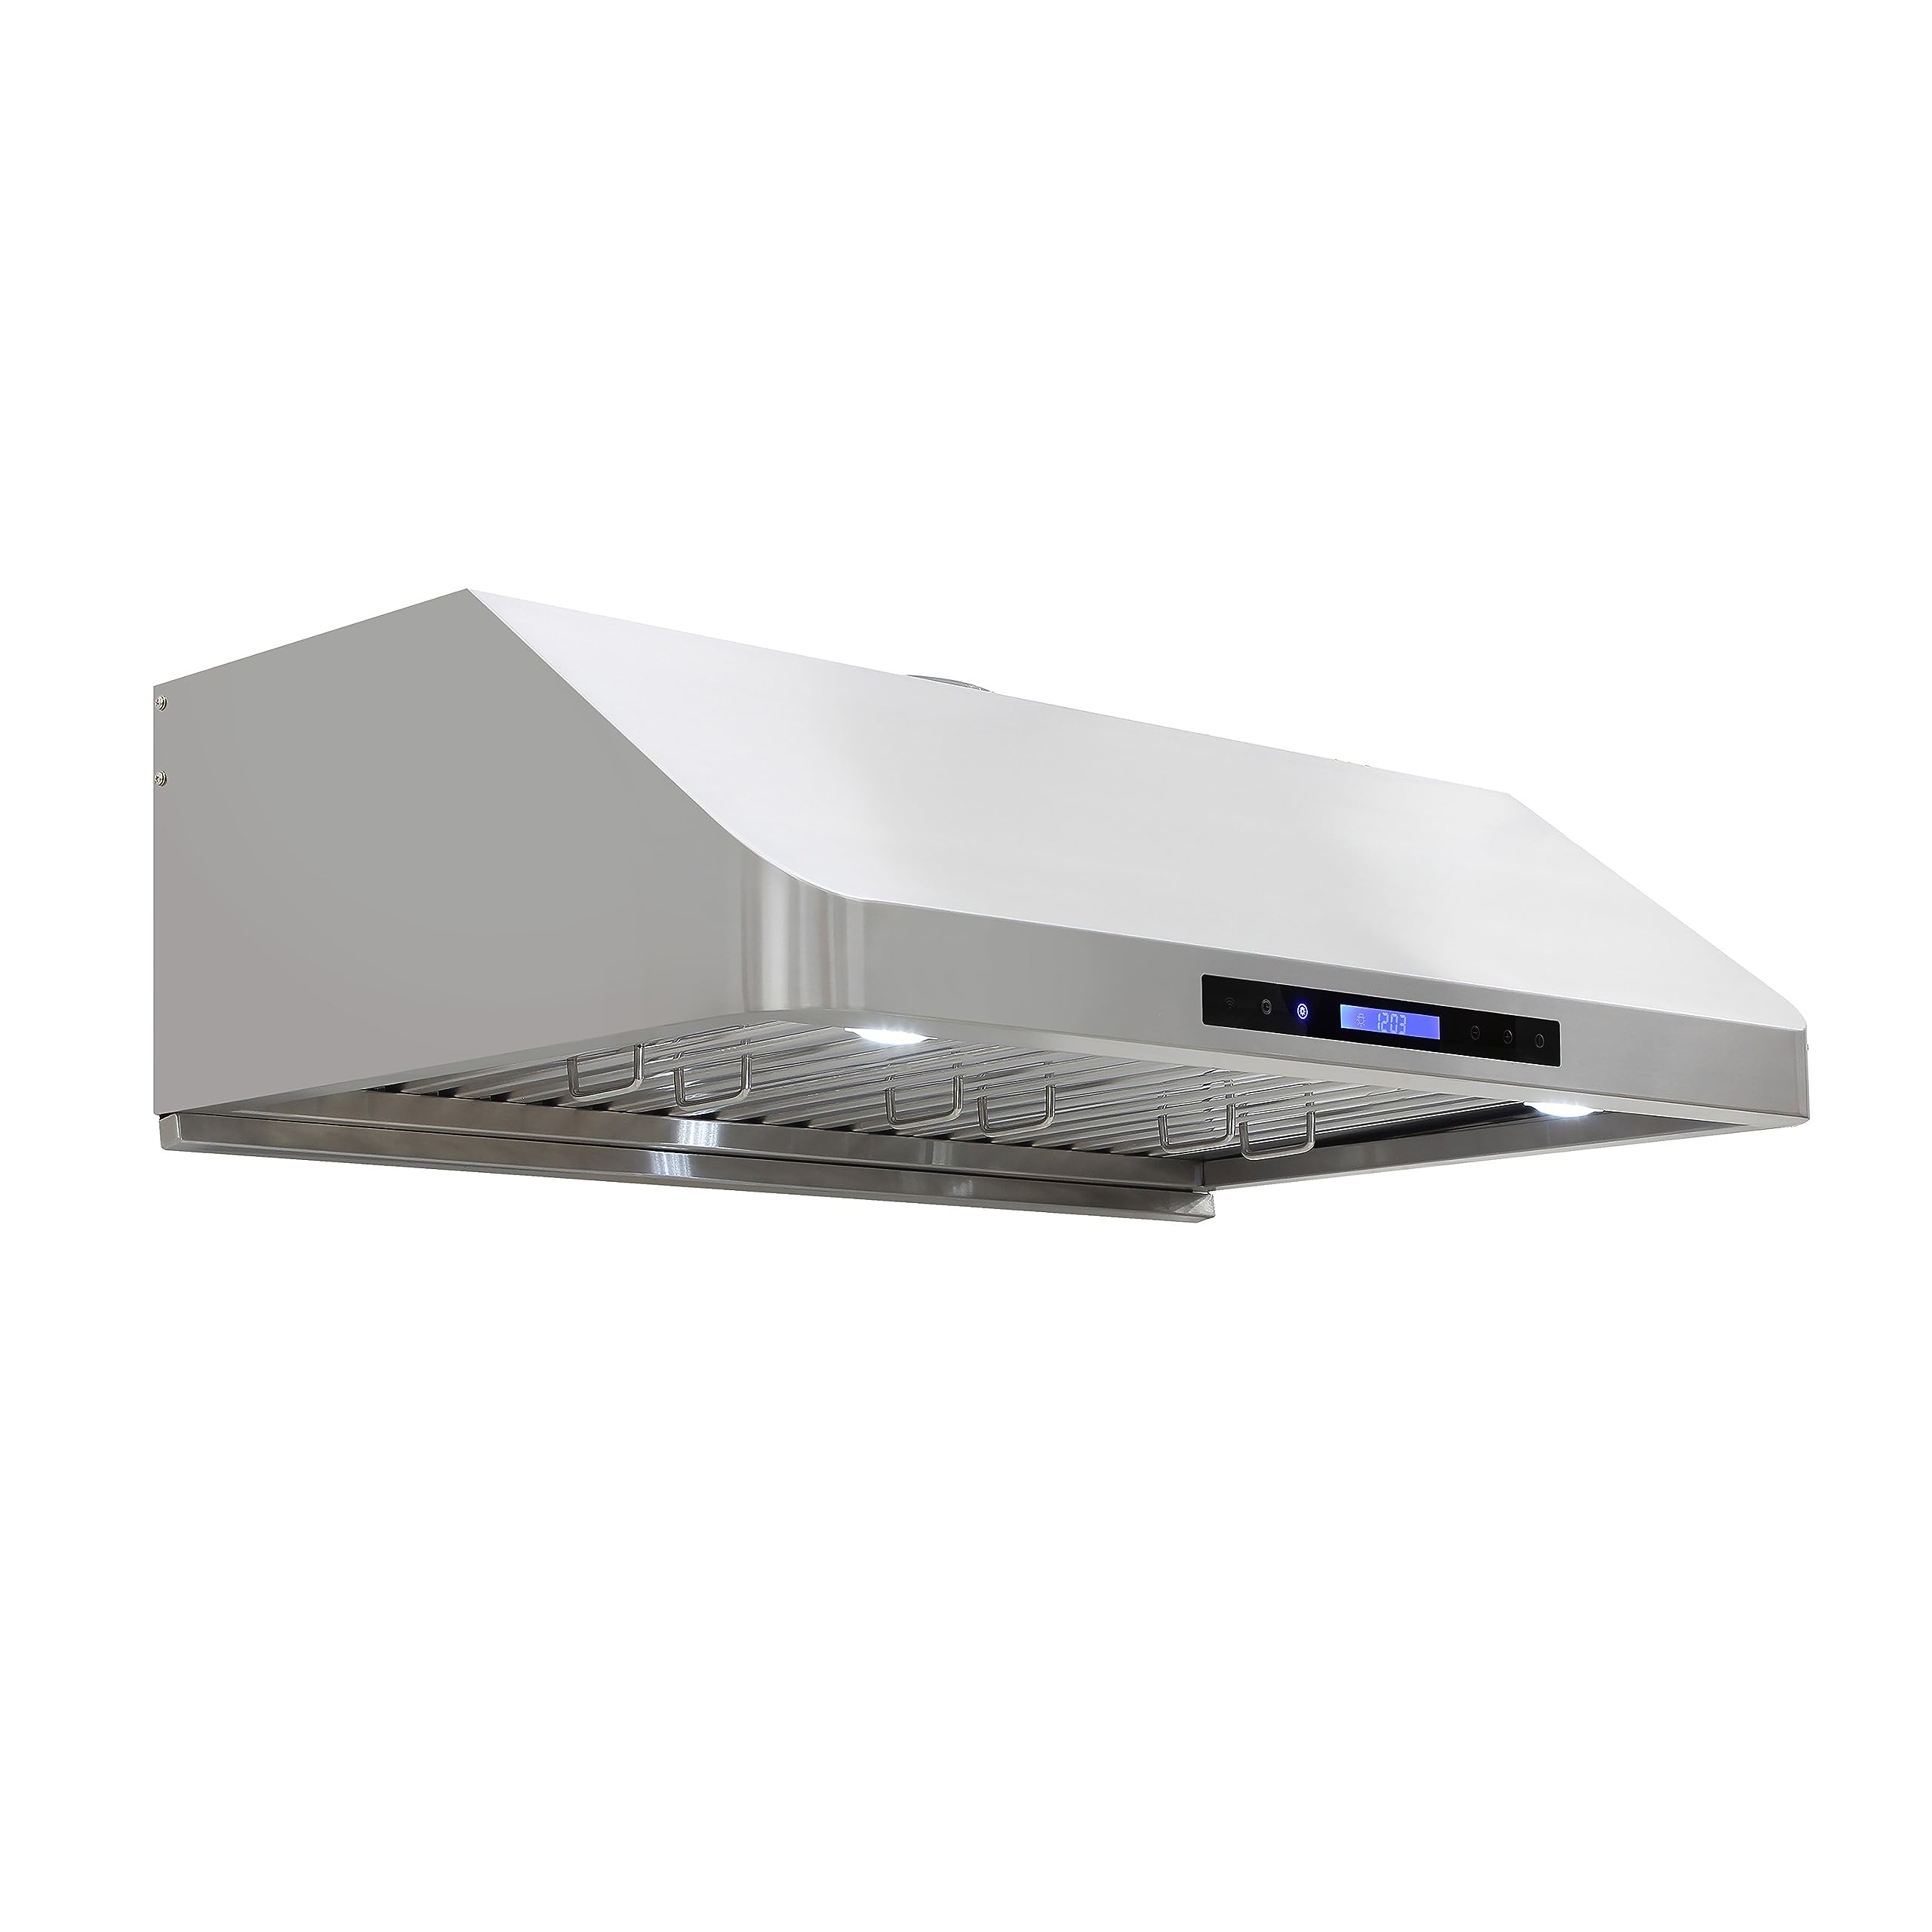 DUURA Elite DE360RHSSS Range Hood Under Cabinet with Exhaust Duct, Touchscreen LED Lights 4-Speed Fan with Remote Control and Dishwasher Safe Filter, 36 in, Metallic